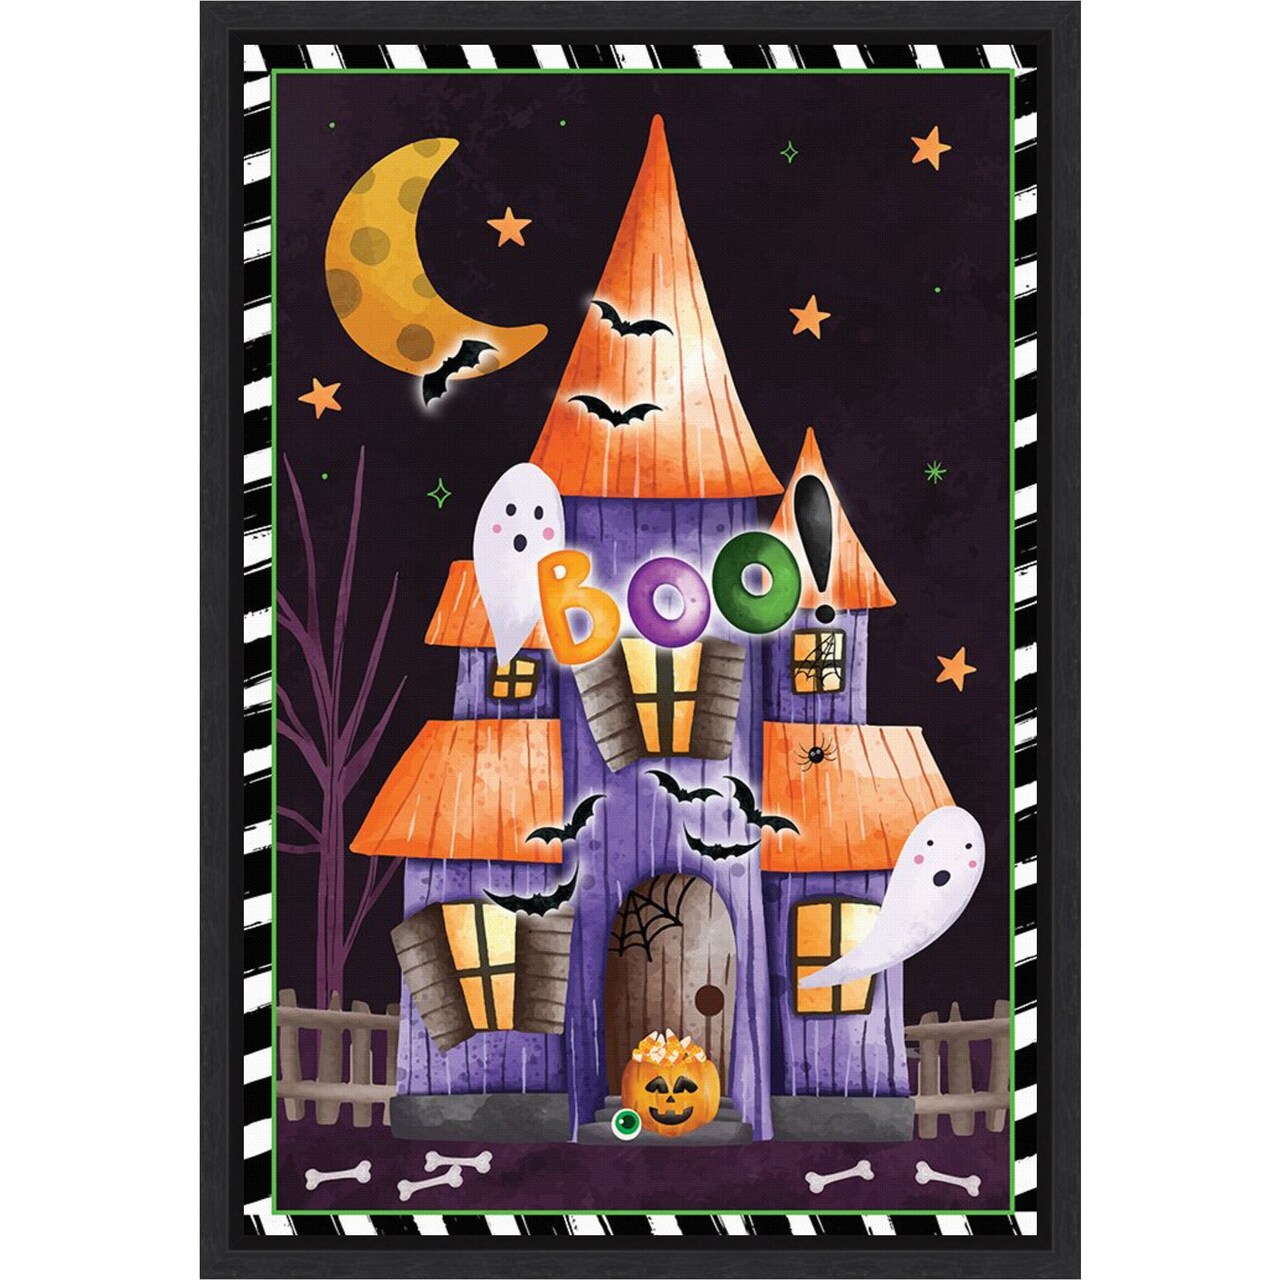 Haunted House by Art Nd Framed Canvas Wall Art